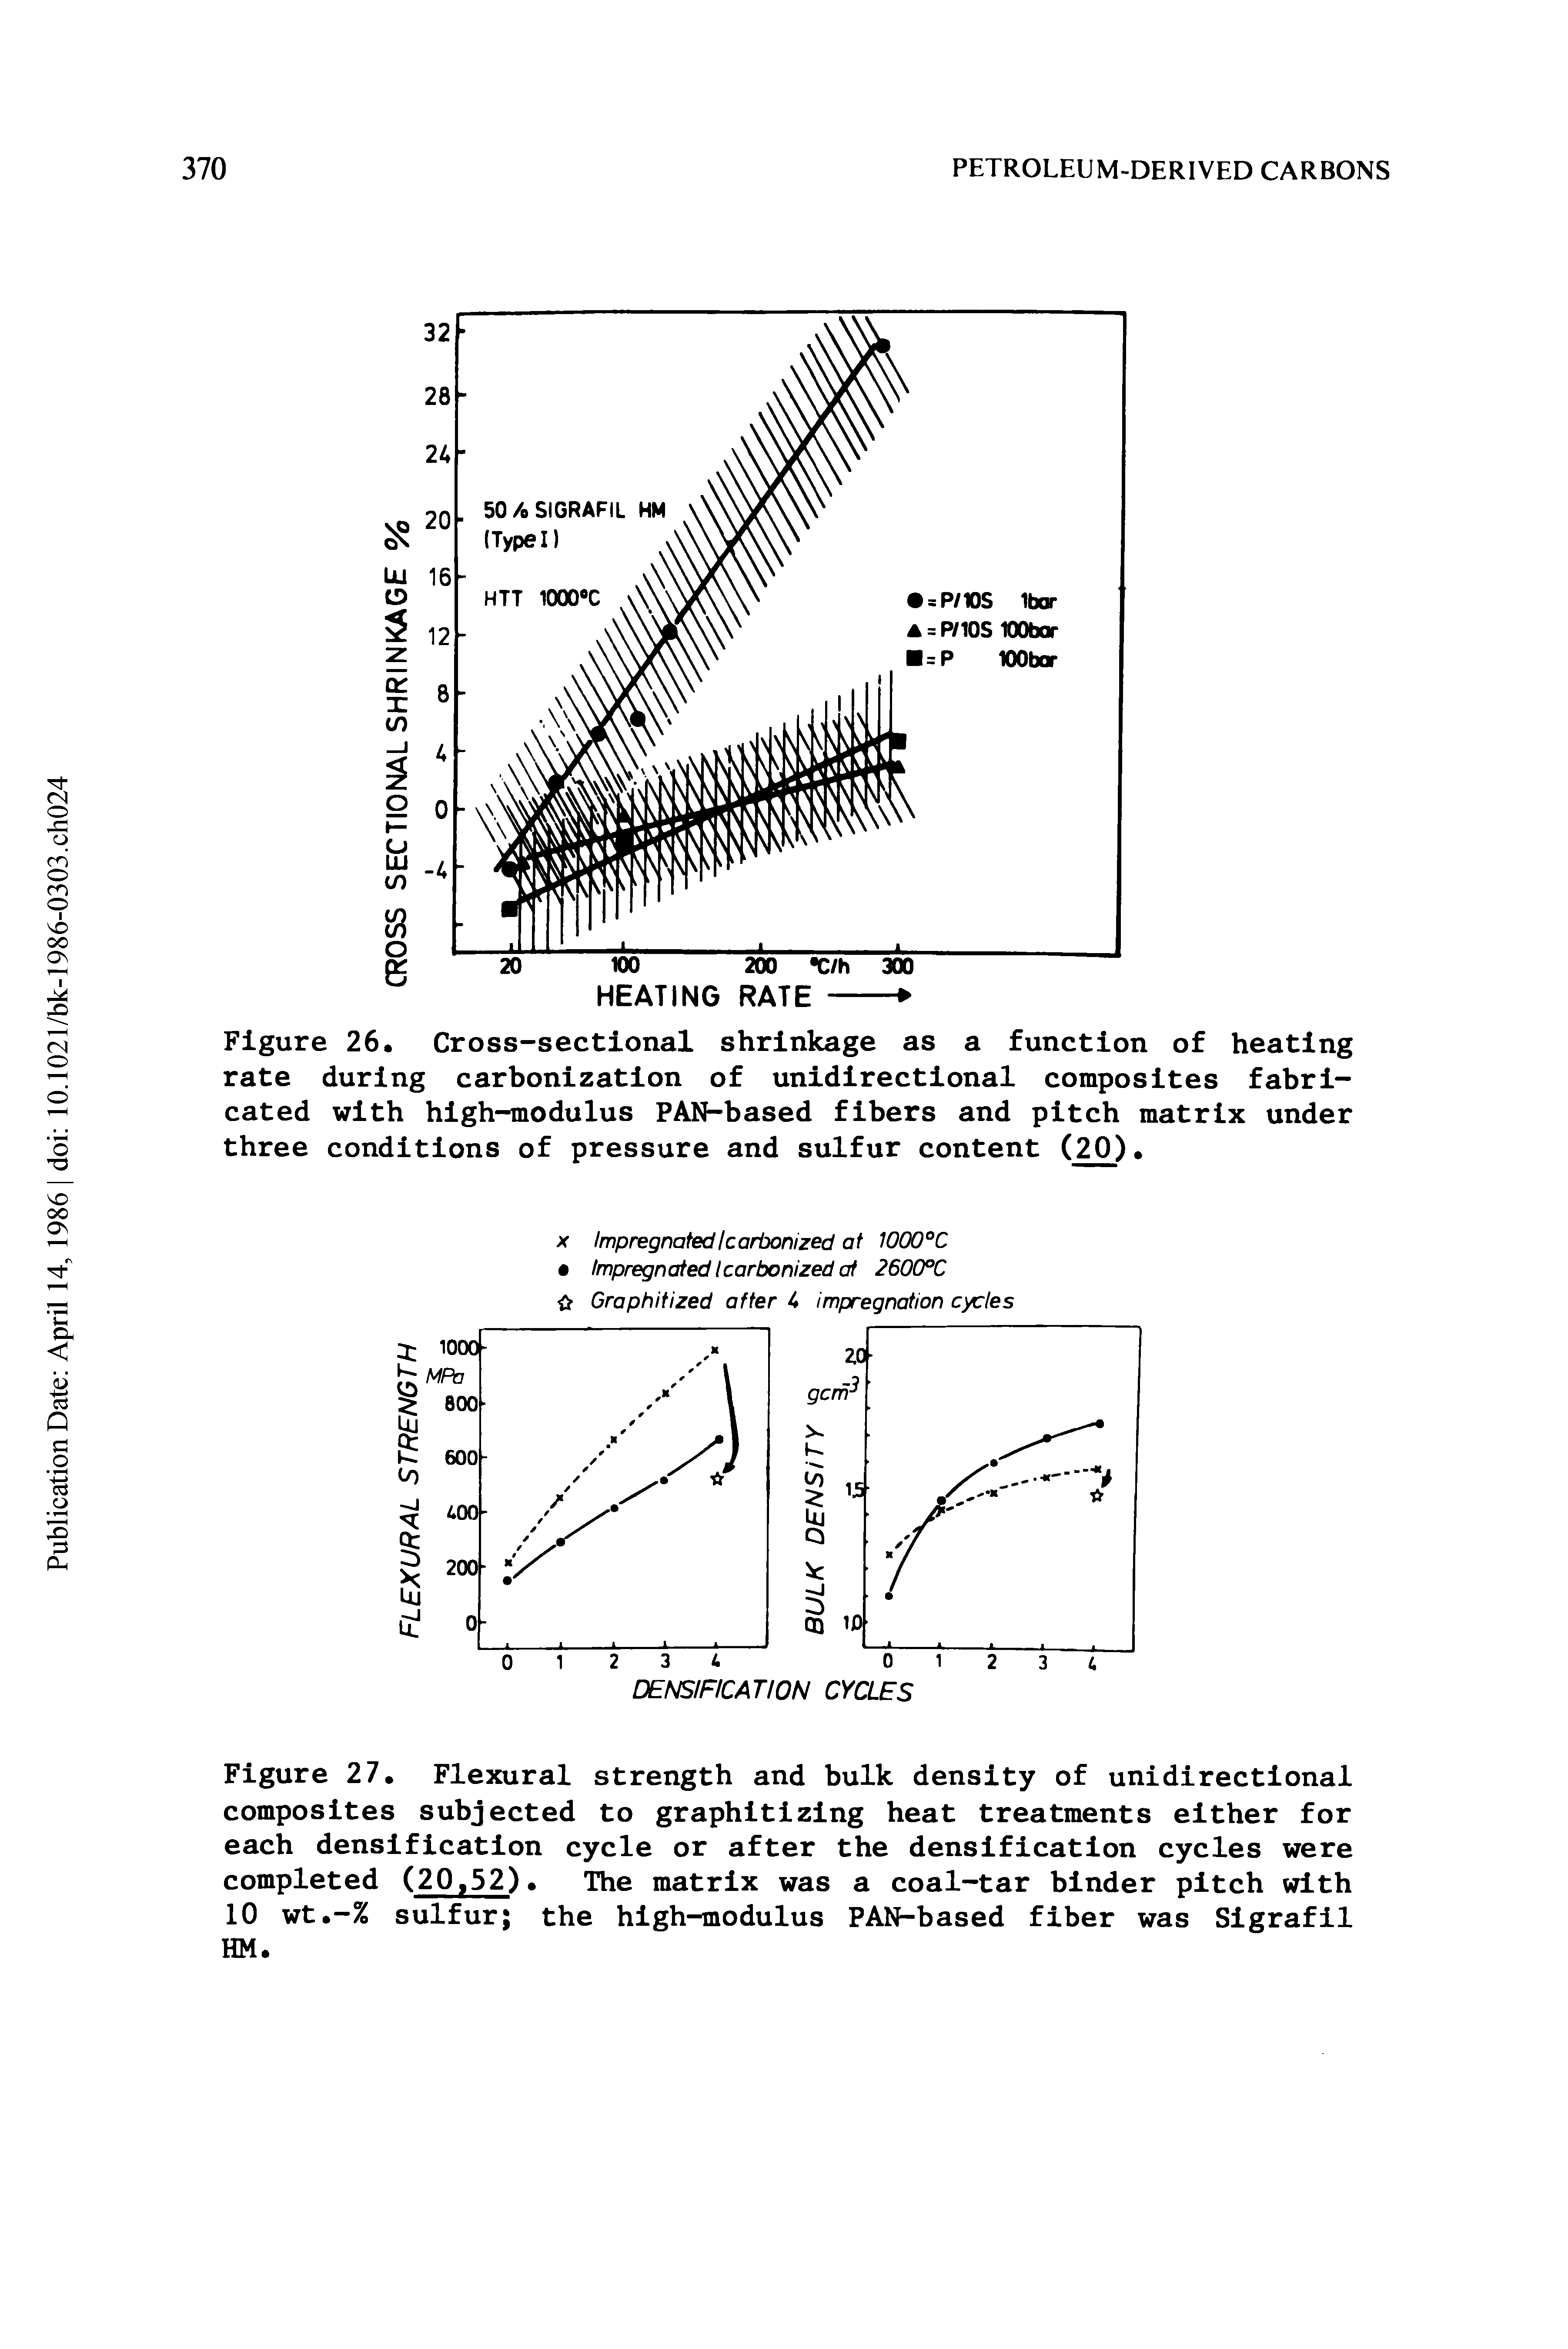 Figure 27. Flexural strength and bulk density of unidirectional composites subjected to graphitizing heat treatments either for each densification cycle or after the densification cycles were completed (20,52) The matrix was a coal-tar binder pitch with 10 wt.-% sulfur the high-modulus PAN-based fiber was Sigrafil HM.